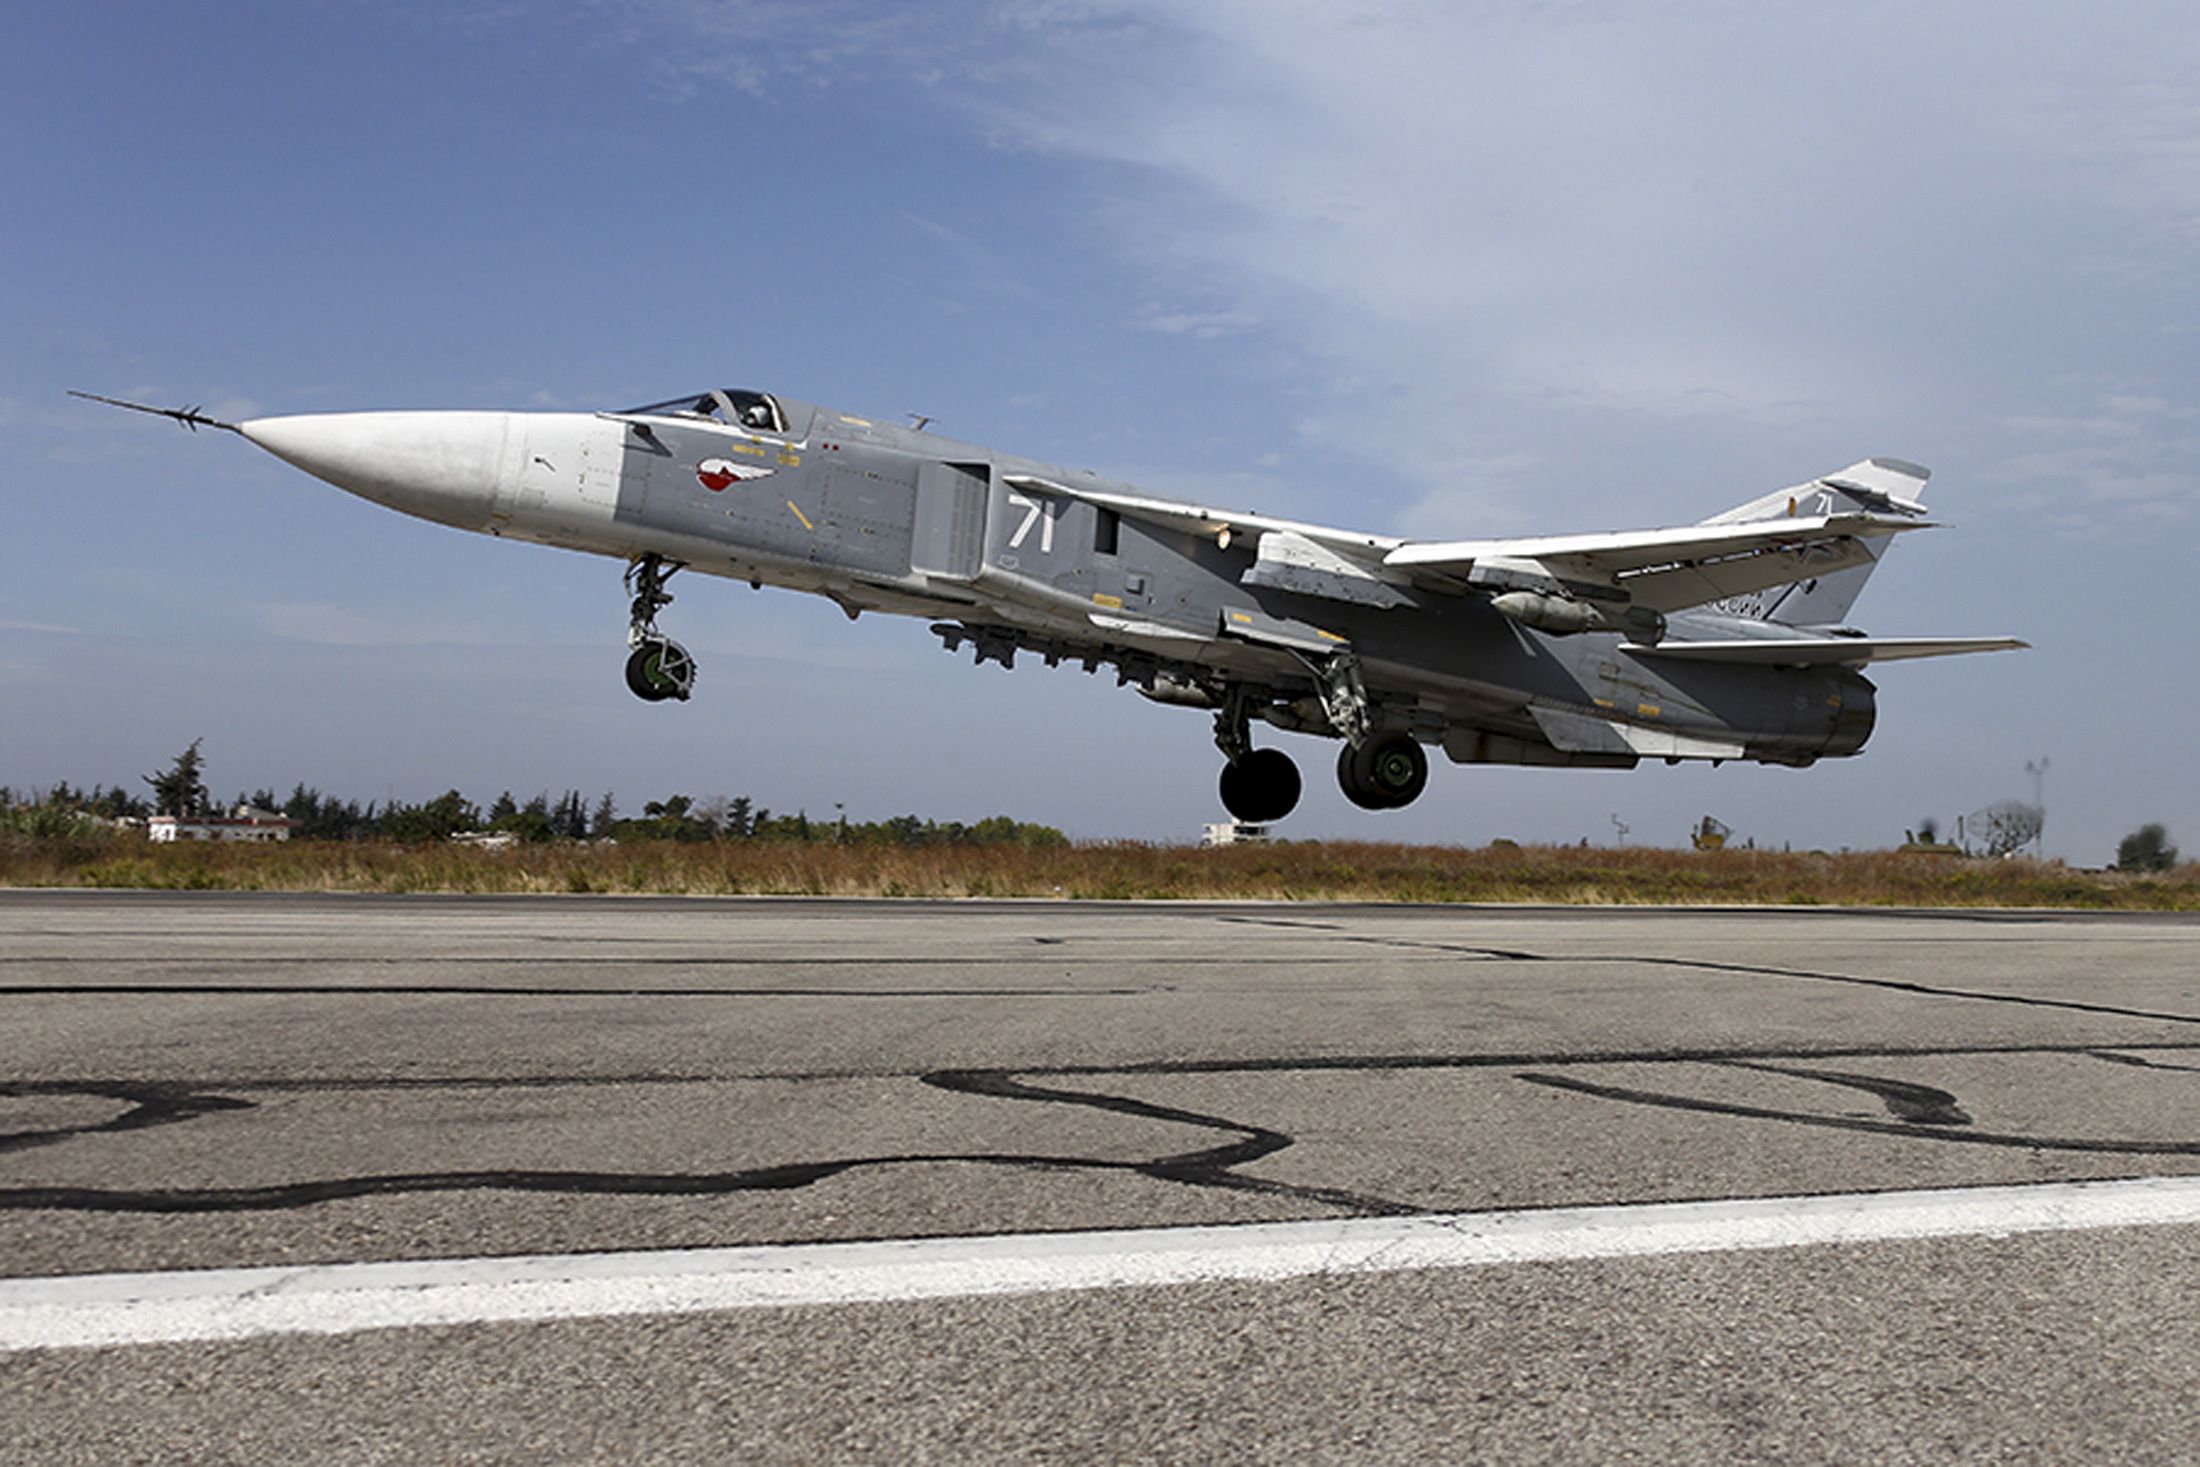 Russia NATO War Conflict Possible As Jets Again Test Airspace In Europe?